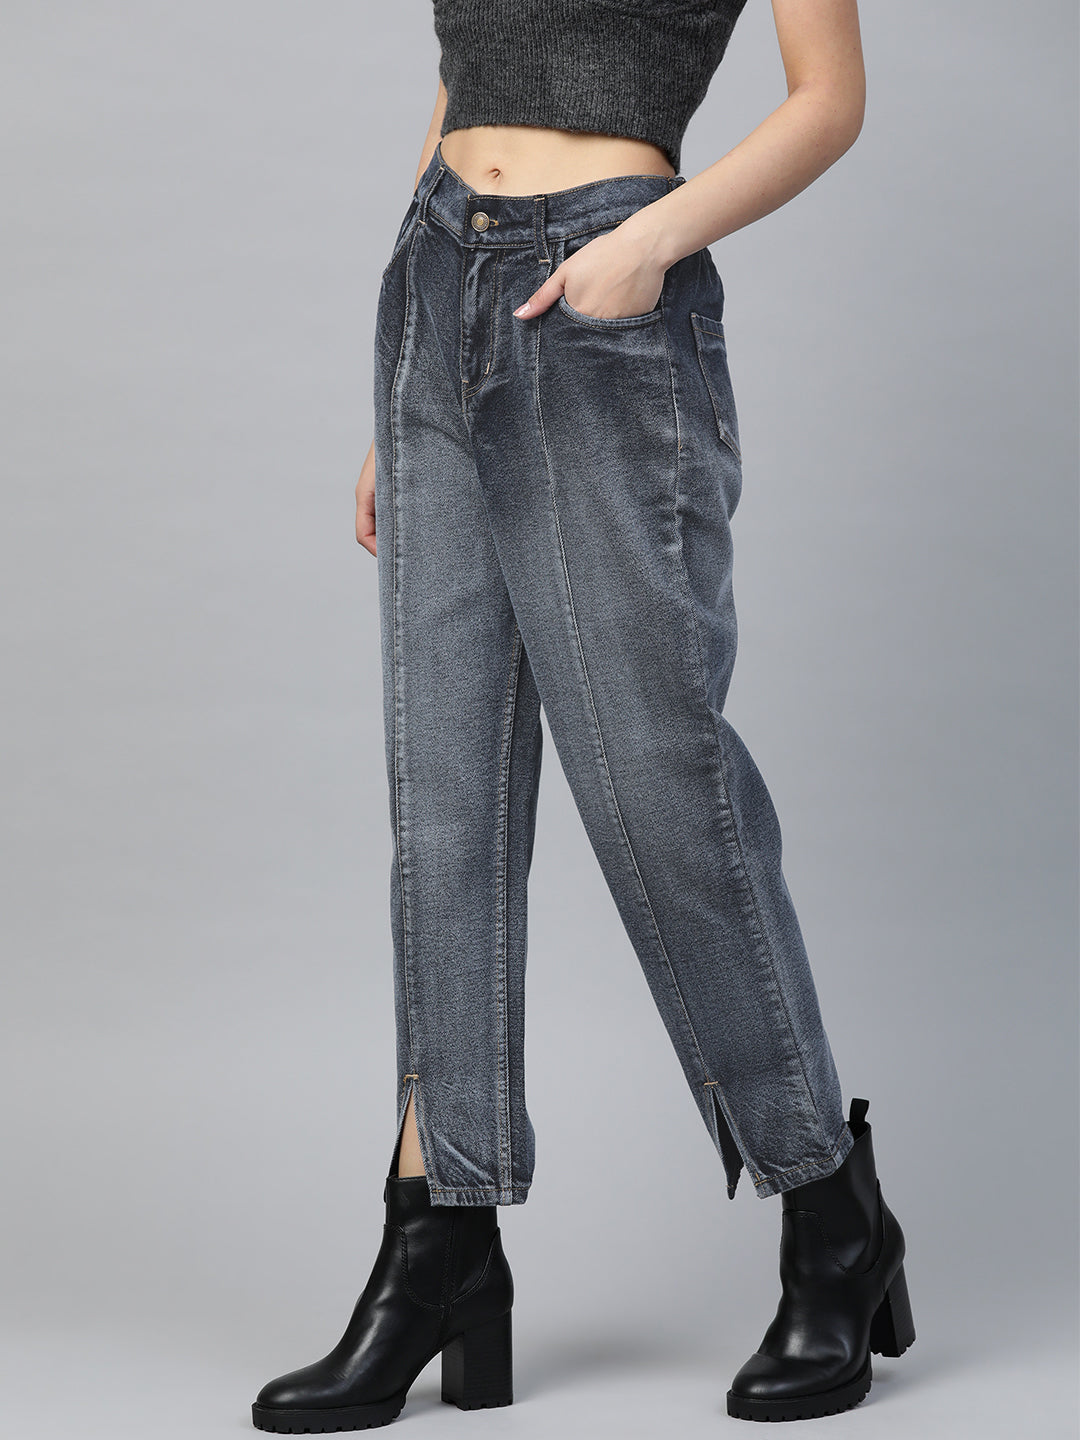 Navy Washed High Waist Front Slit Jeans